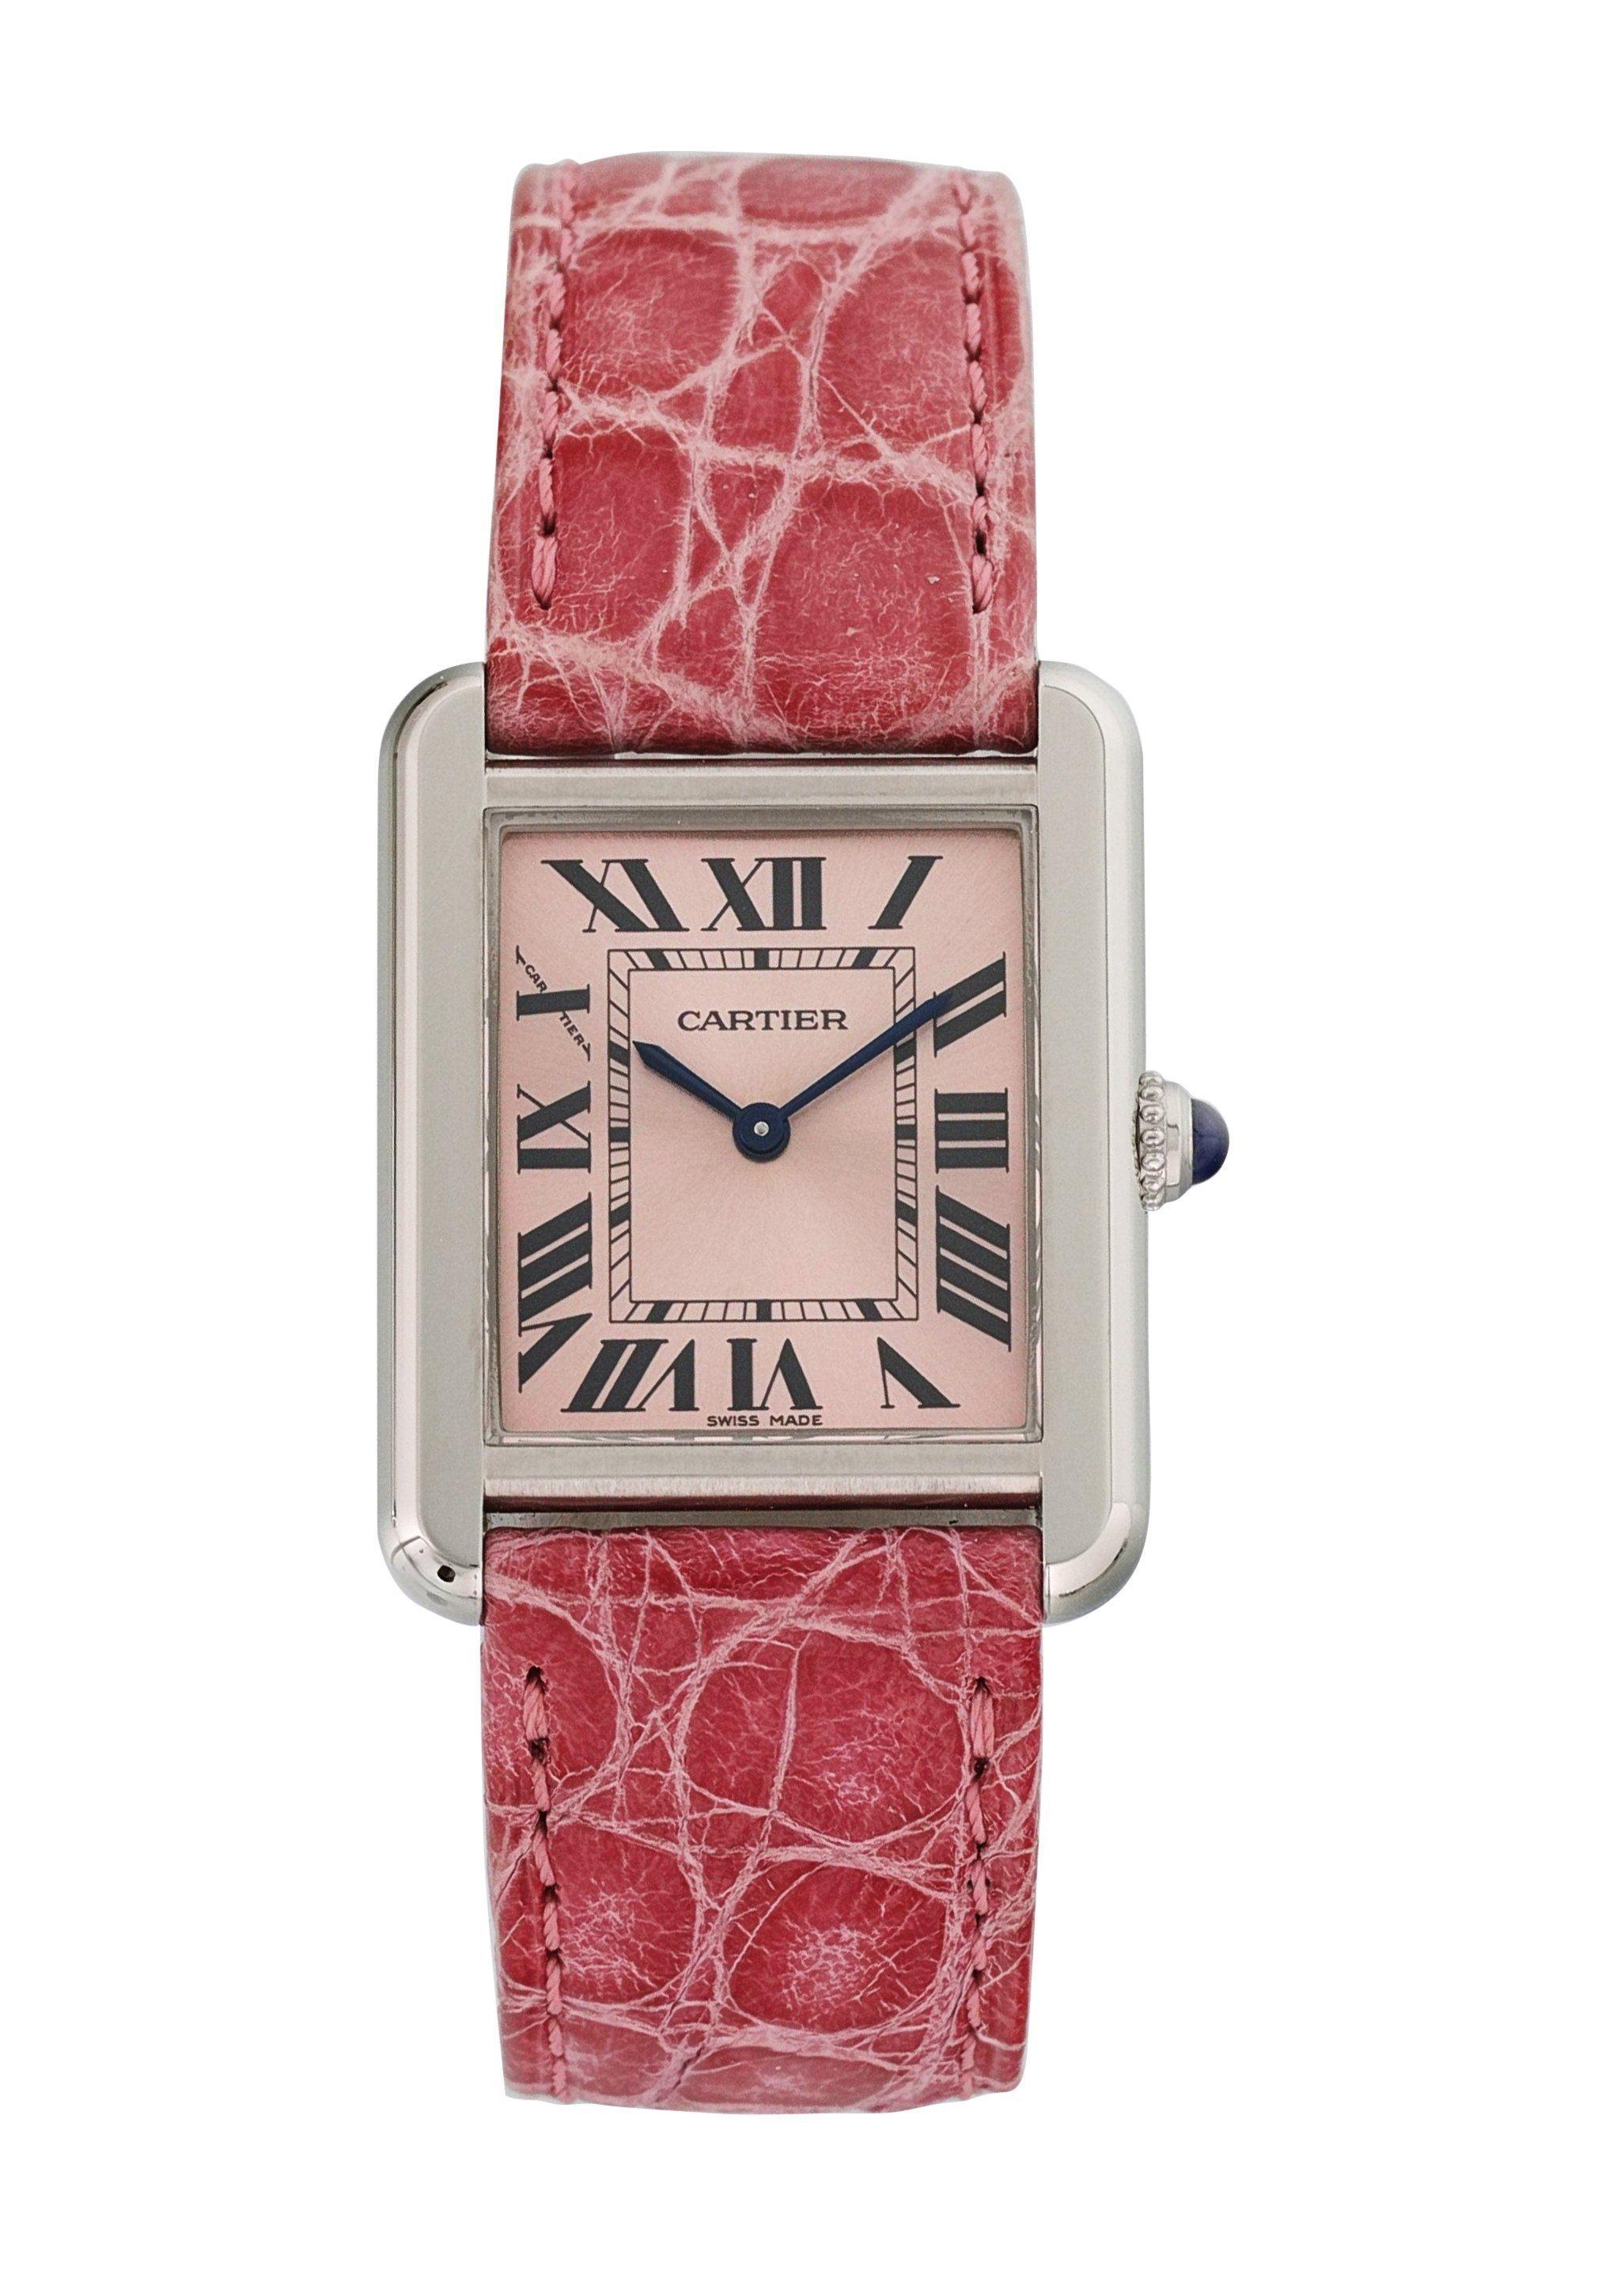 Cartier Tank Solo 3170 Ladies Watch.
24 x 30mm Stainless Steel case. 
Stainless Steel Stationary bezel. 
Pink dial with Blue steel hands and index hour markers. 
Minute markers on the inner dial. 
Leather Strap with Deployment Buckle. 
Will fit up